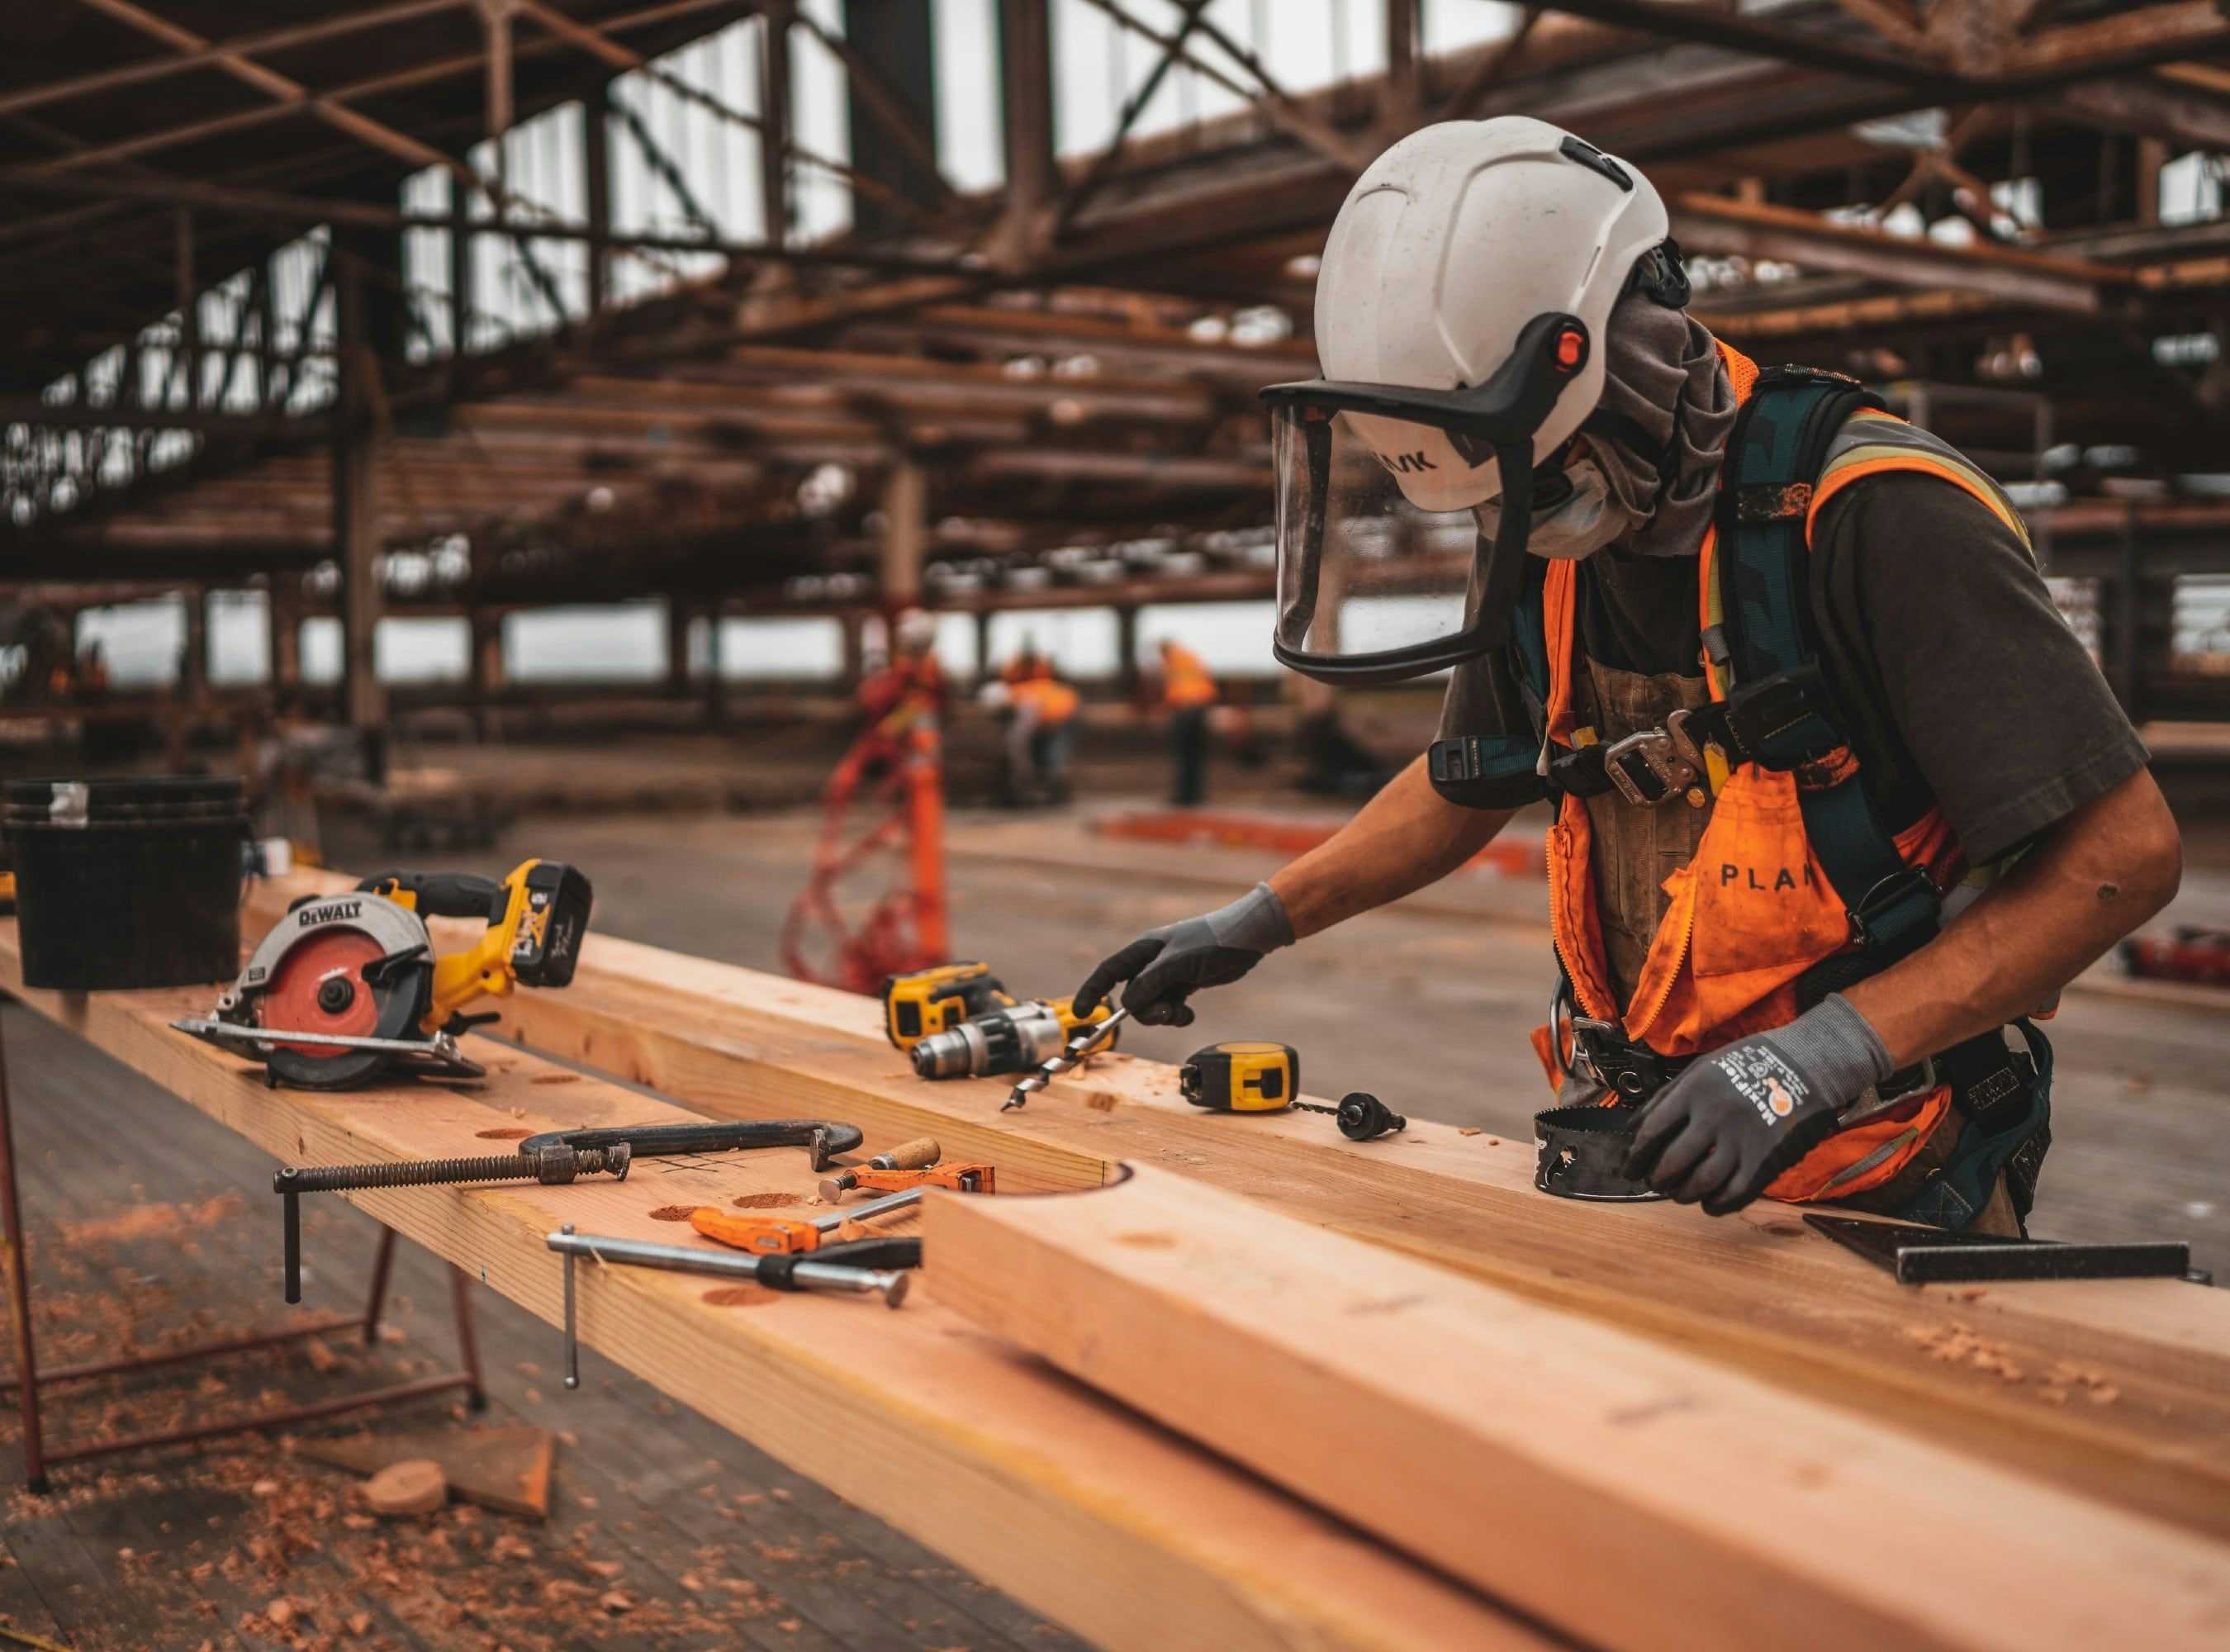 OSHA, ANSI, and Building Code Experts are In Demand for Construction Safety Cases